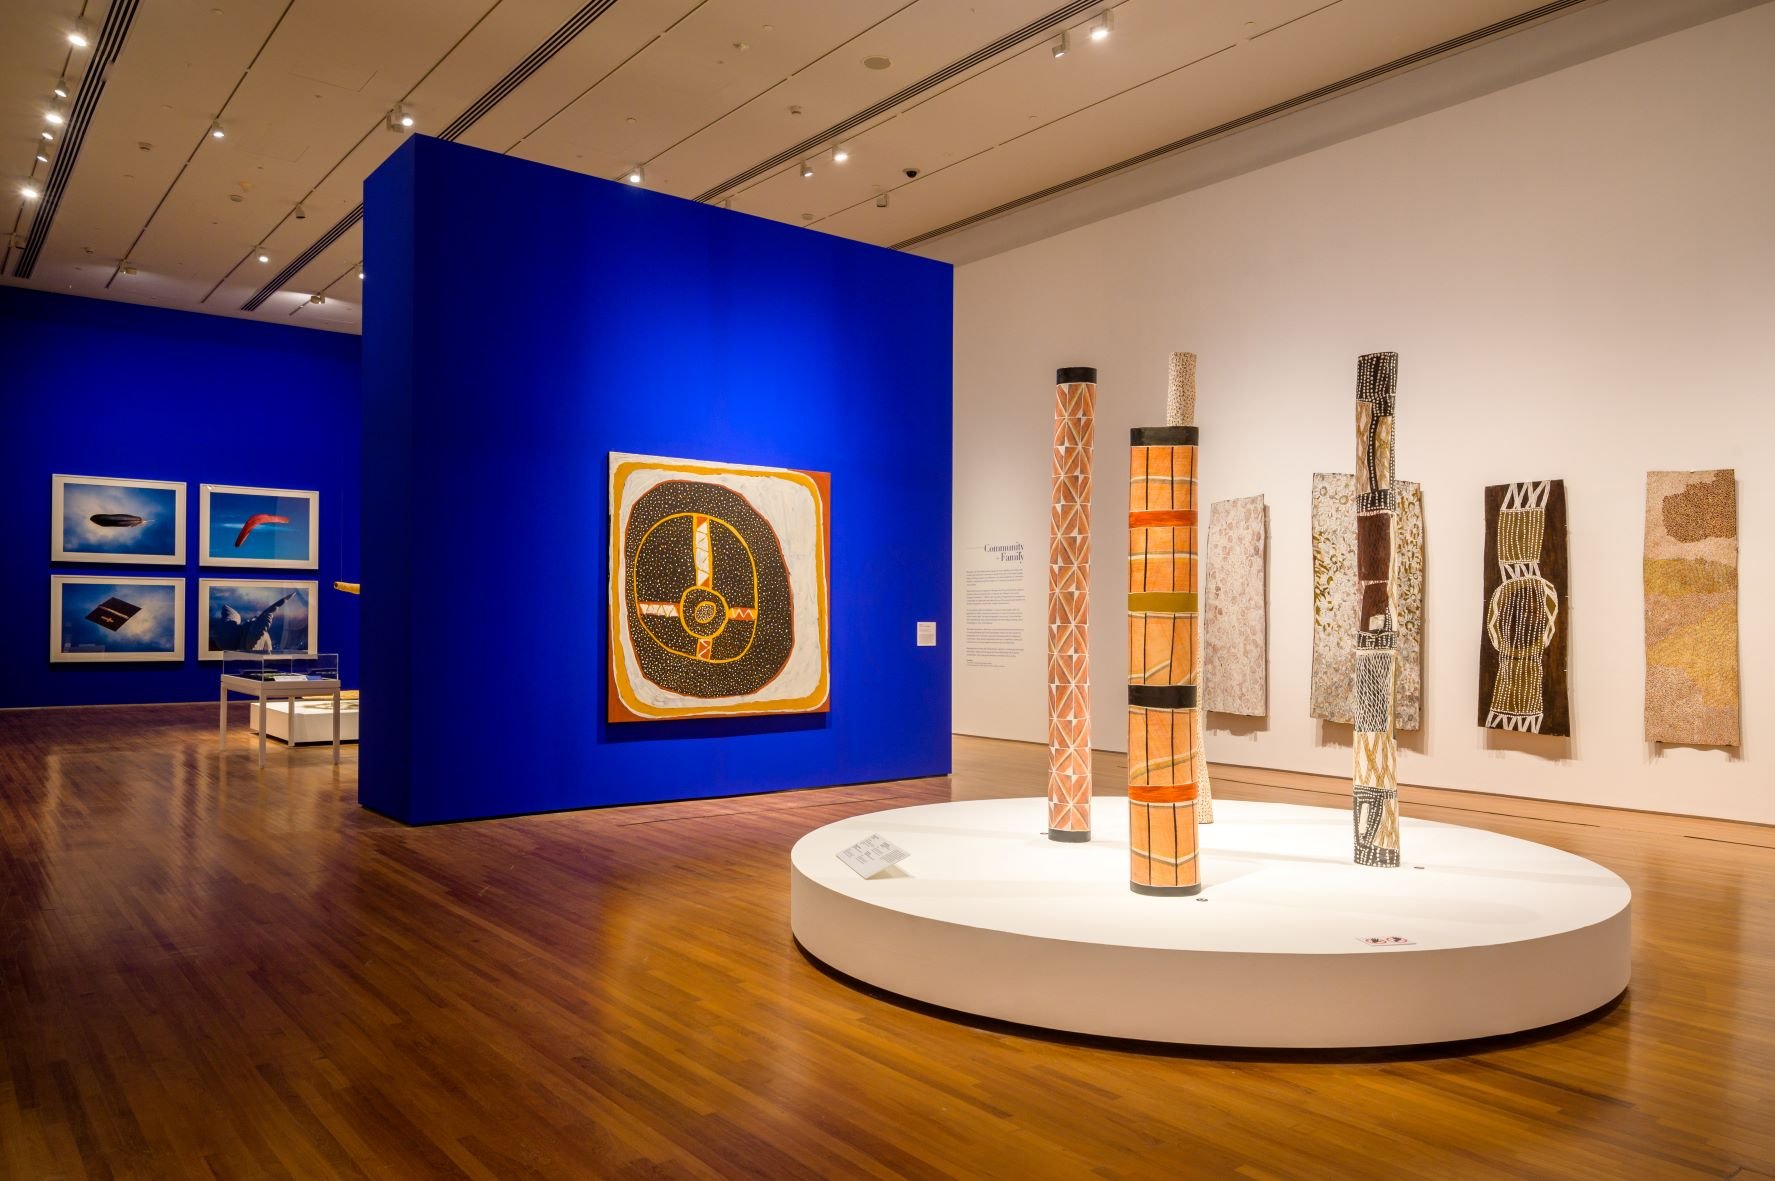  Installation view, ‘Ever Present: First Peoples Art of Australia’, National Gallery Singapore 2022. Image credit: Joseph Nair, Memphis West Pictures. 